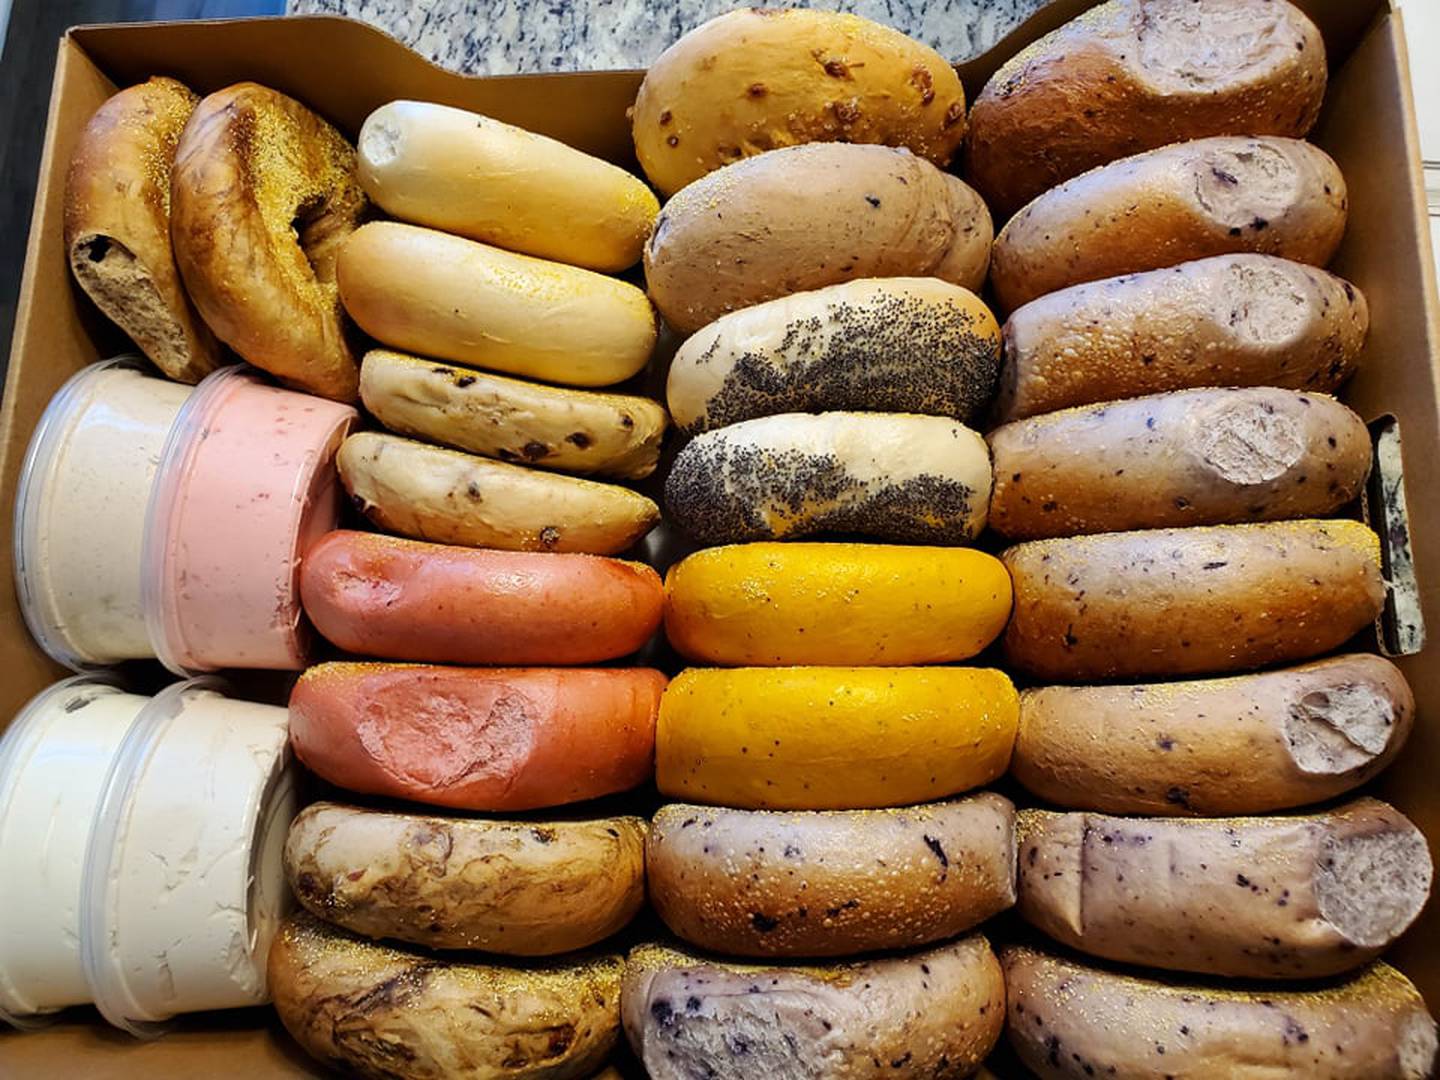 Pictured is a corporate party pack of 26 bagels from Great American Bagel in Joliet. The corporate party pack comes with four flavors of cream cheese toppings, too. We chose plain, vanilla, apple cinnamon and strawberry.